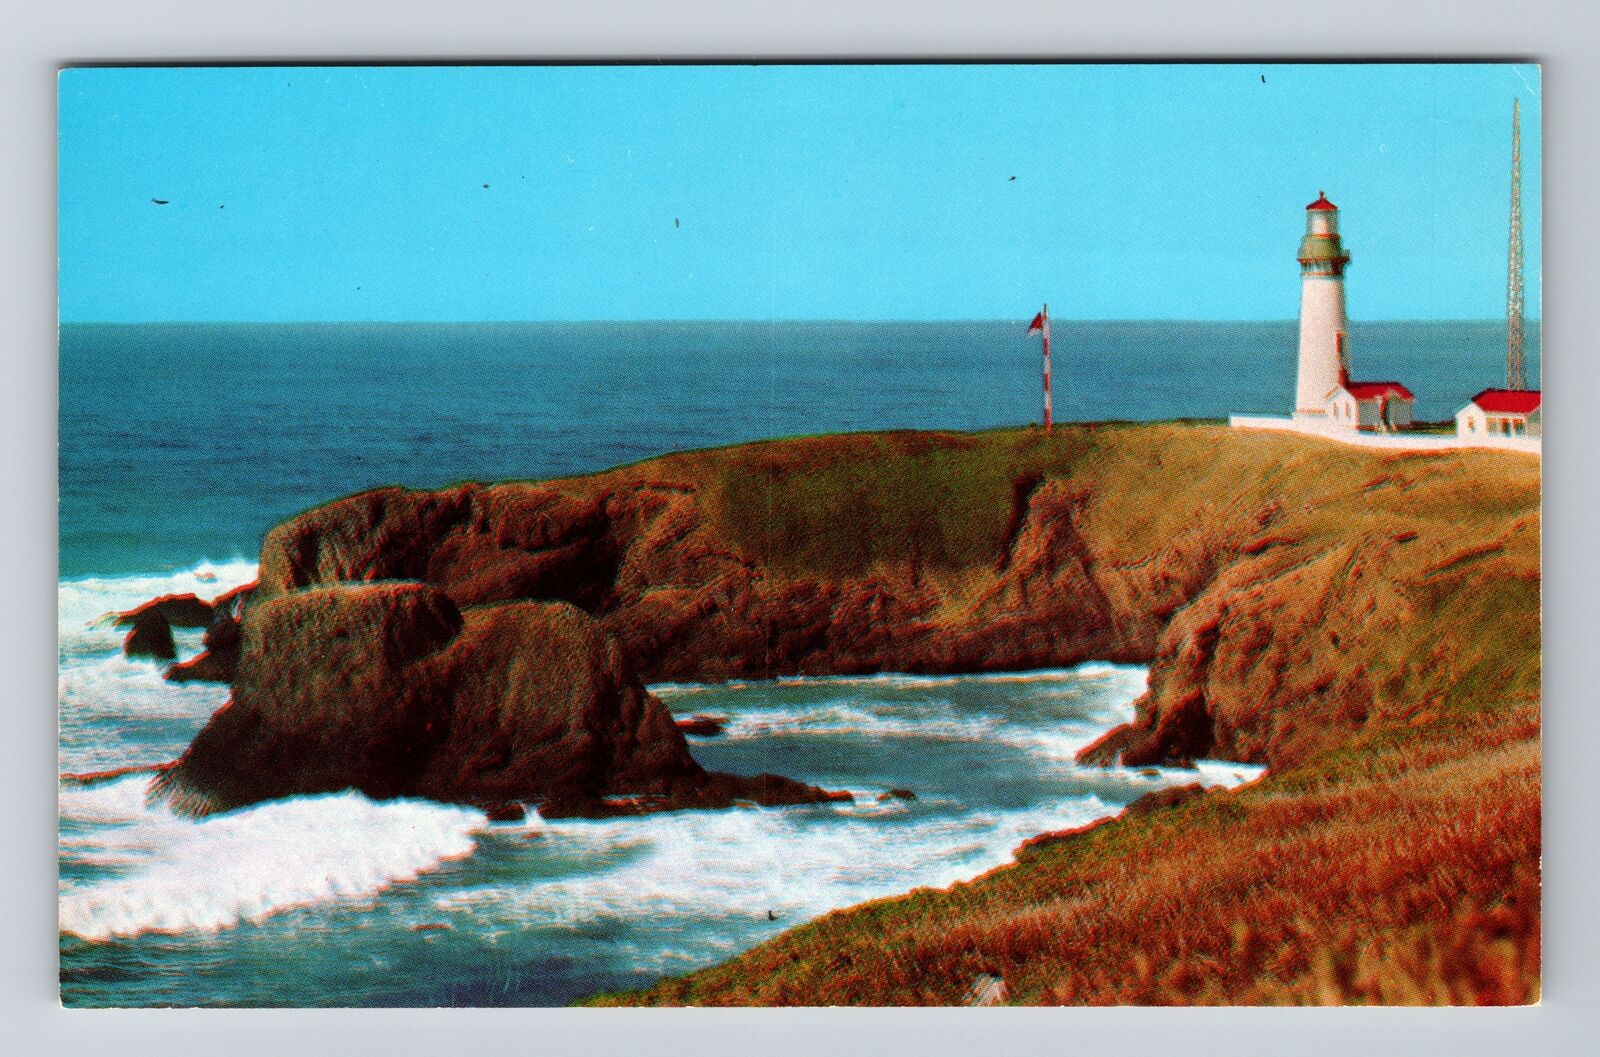 OR-Oregon, Yaquina Head Lighthouse, Scenic View, Vintage Postcard